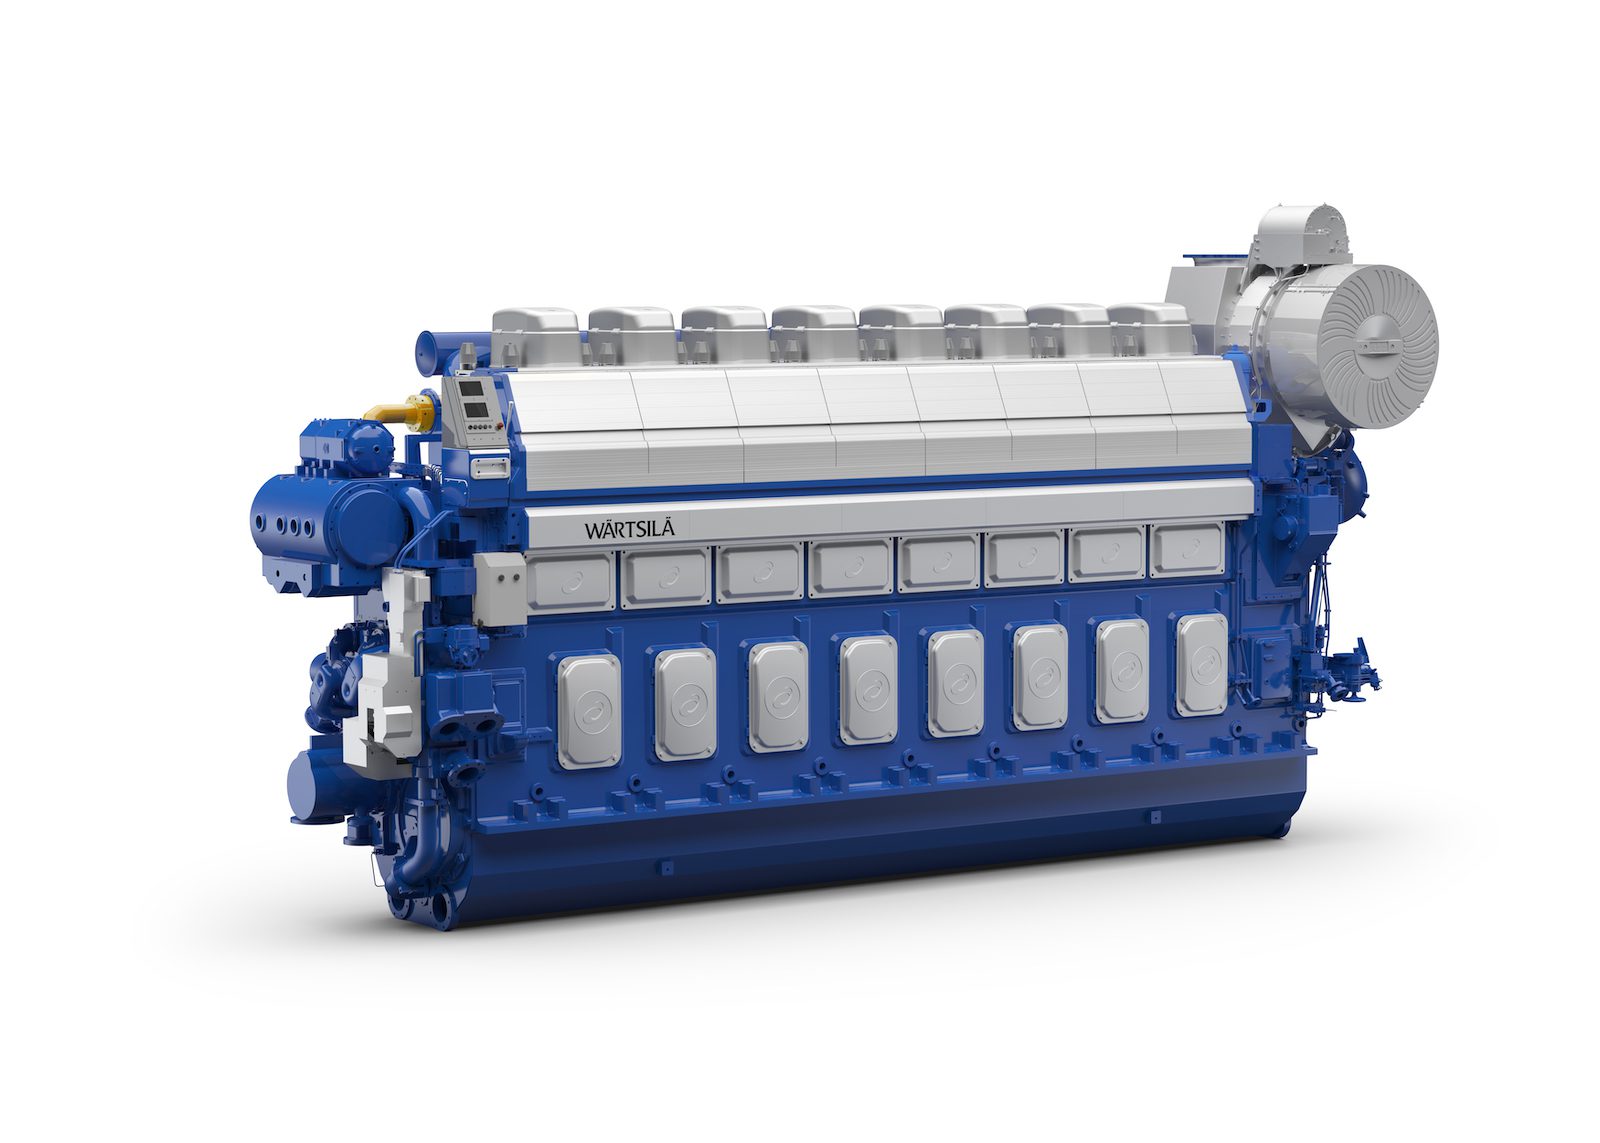 Wärtsilä wins major order to provide 36 dual-fuel engines for six new LNG carrier vessels